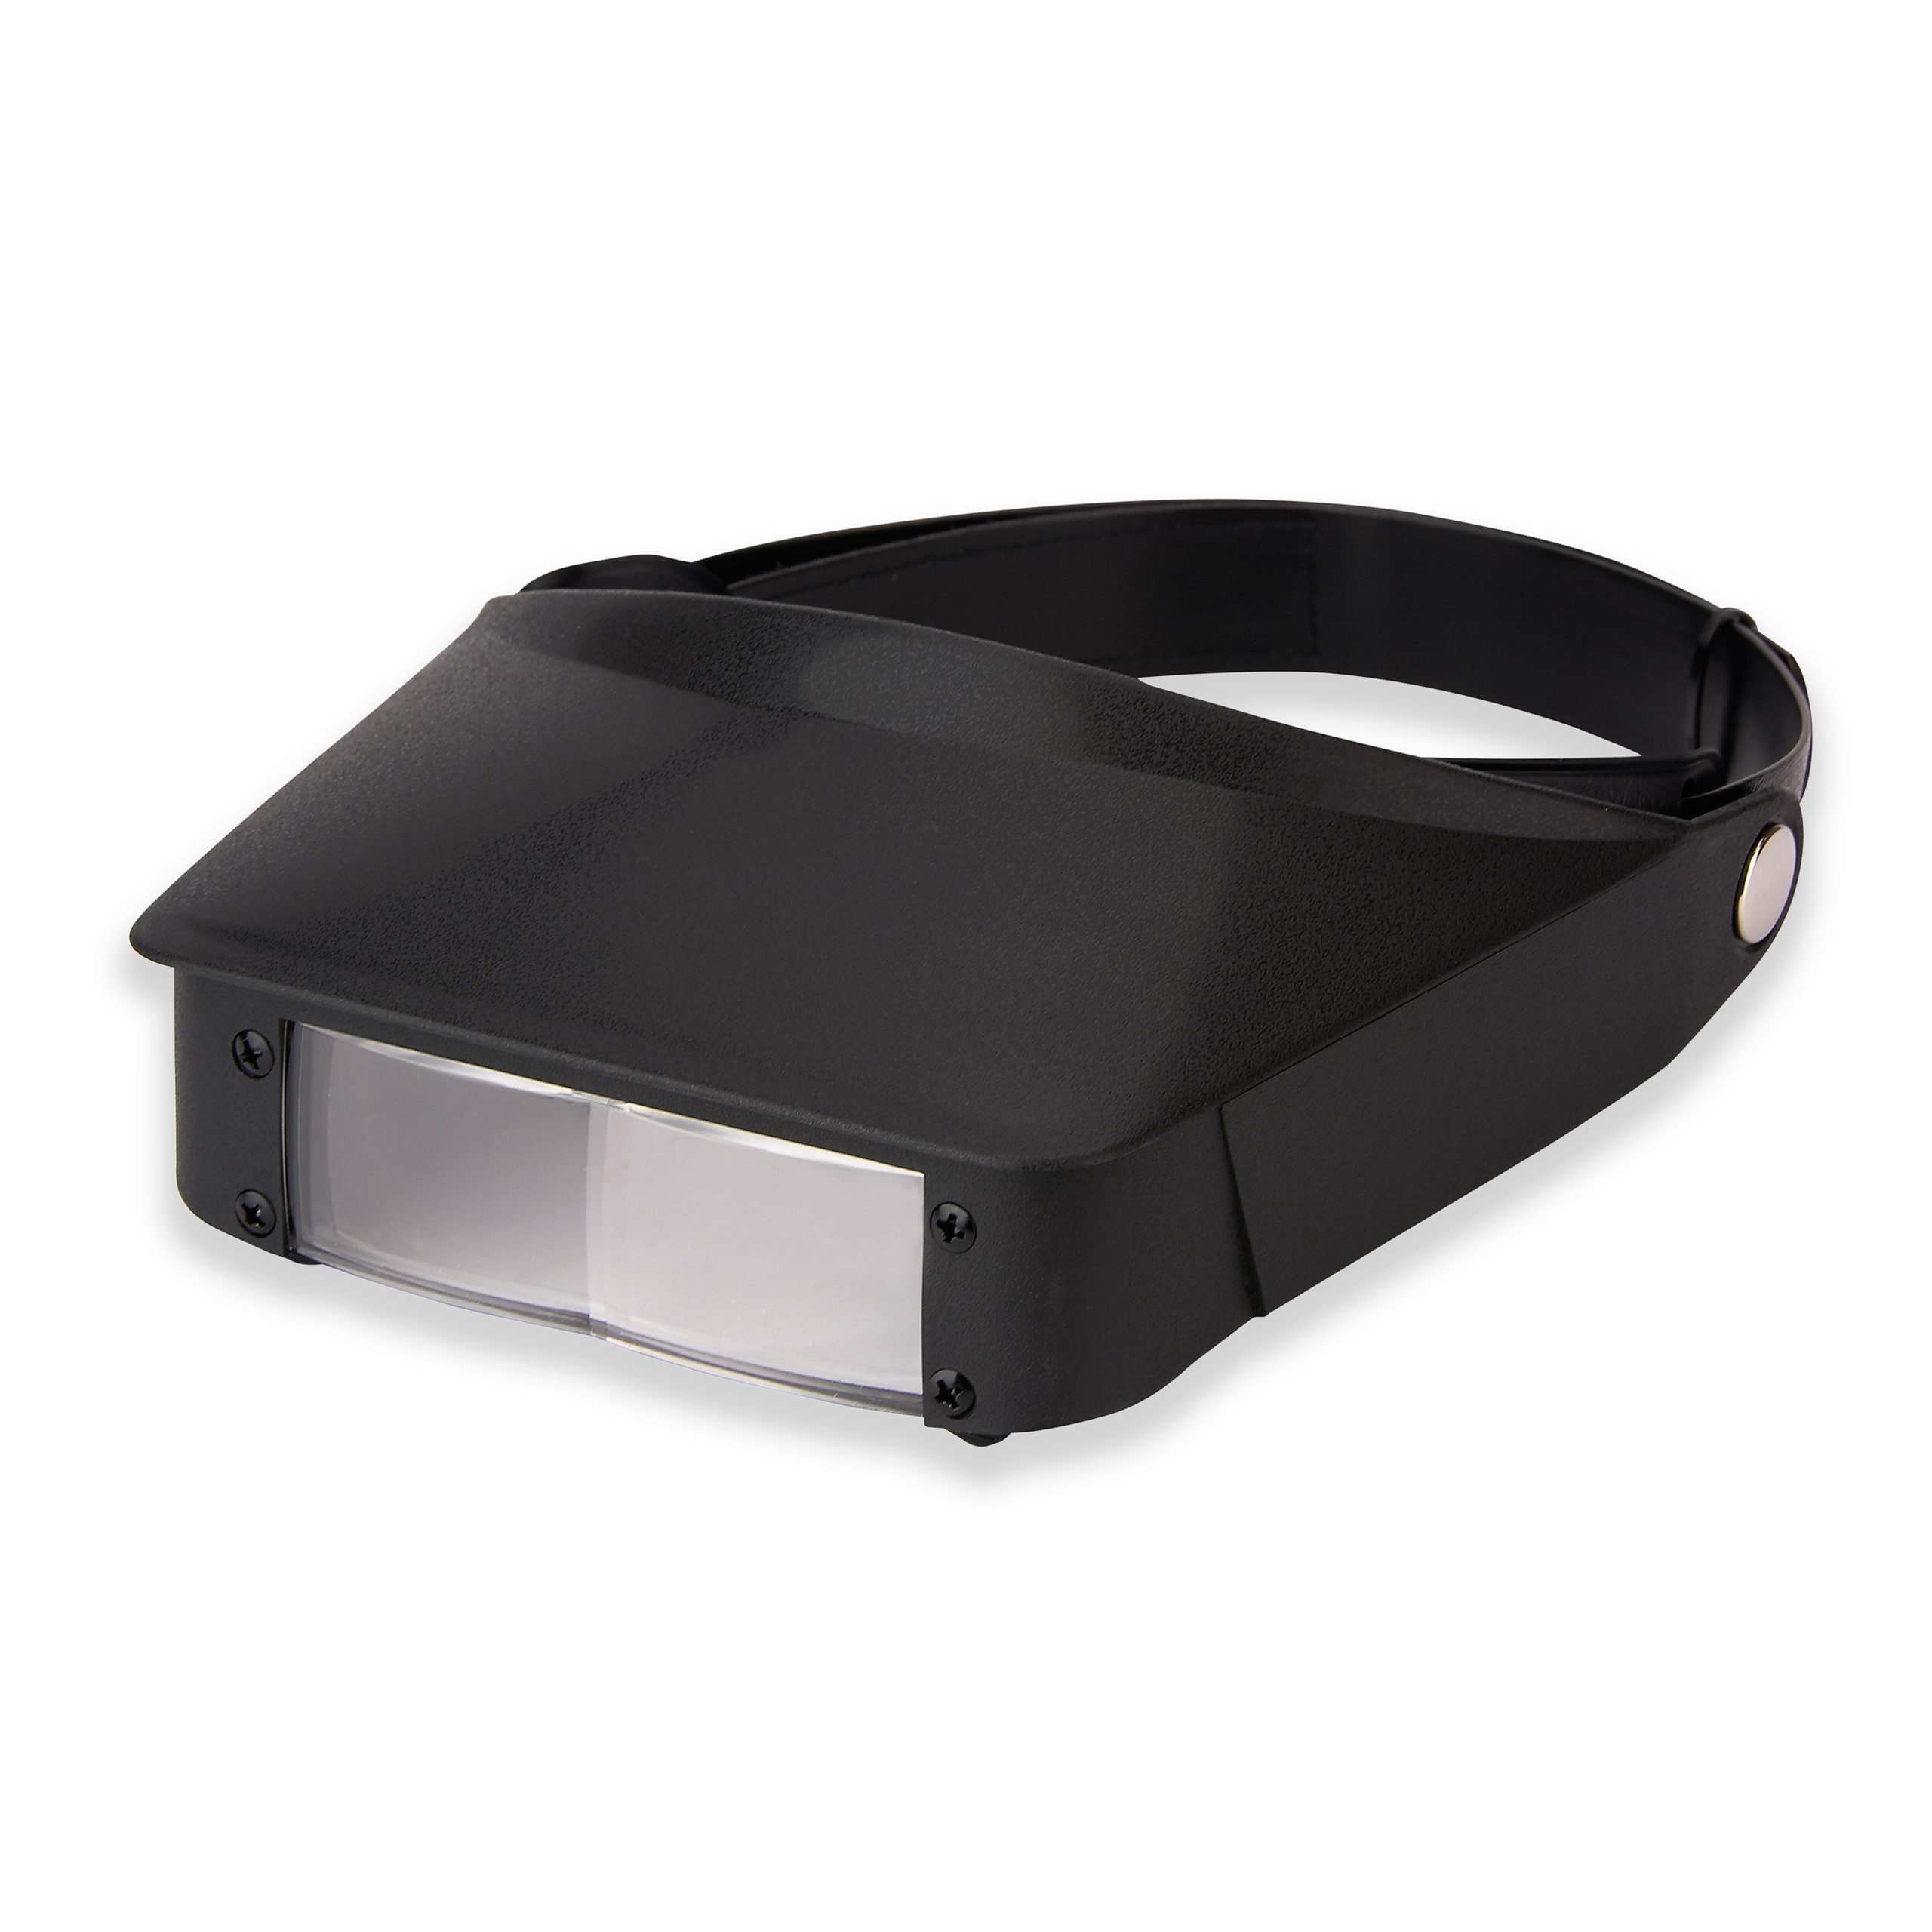 Magnifier - 2 LED Head Wearing –